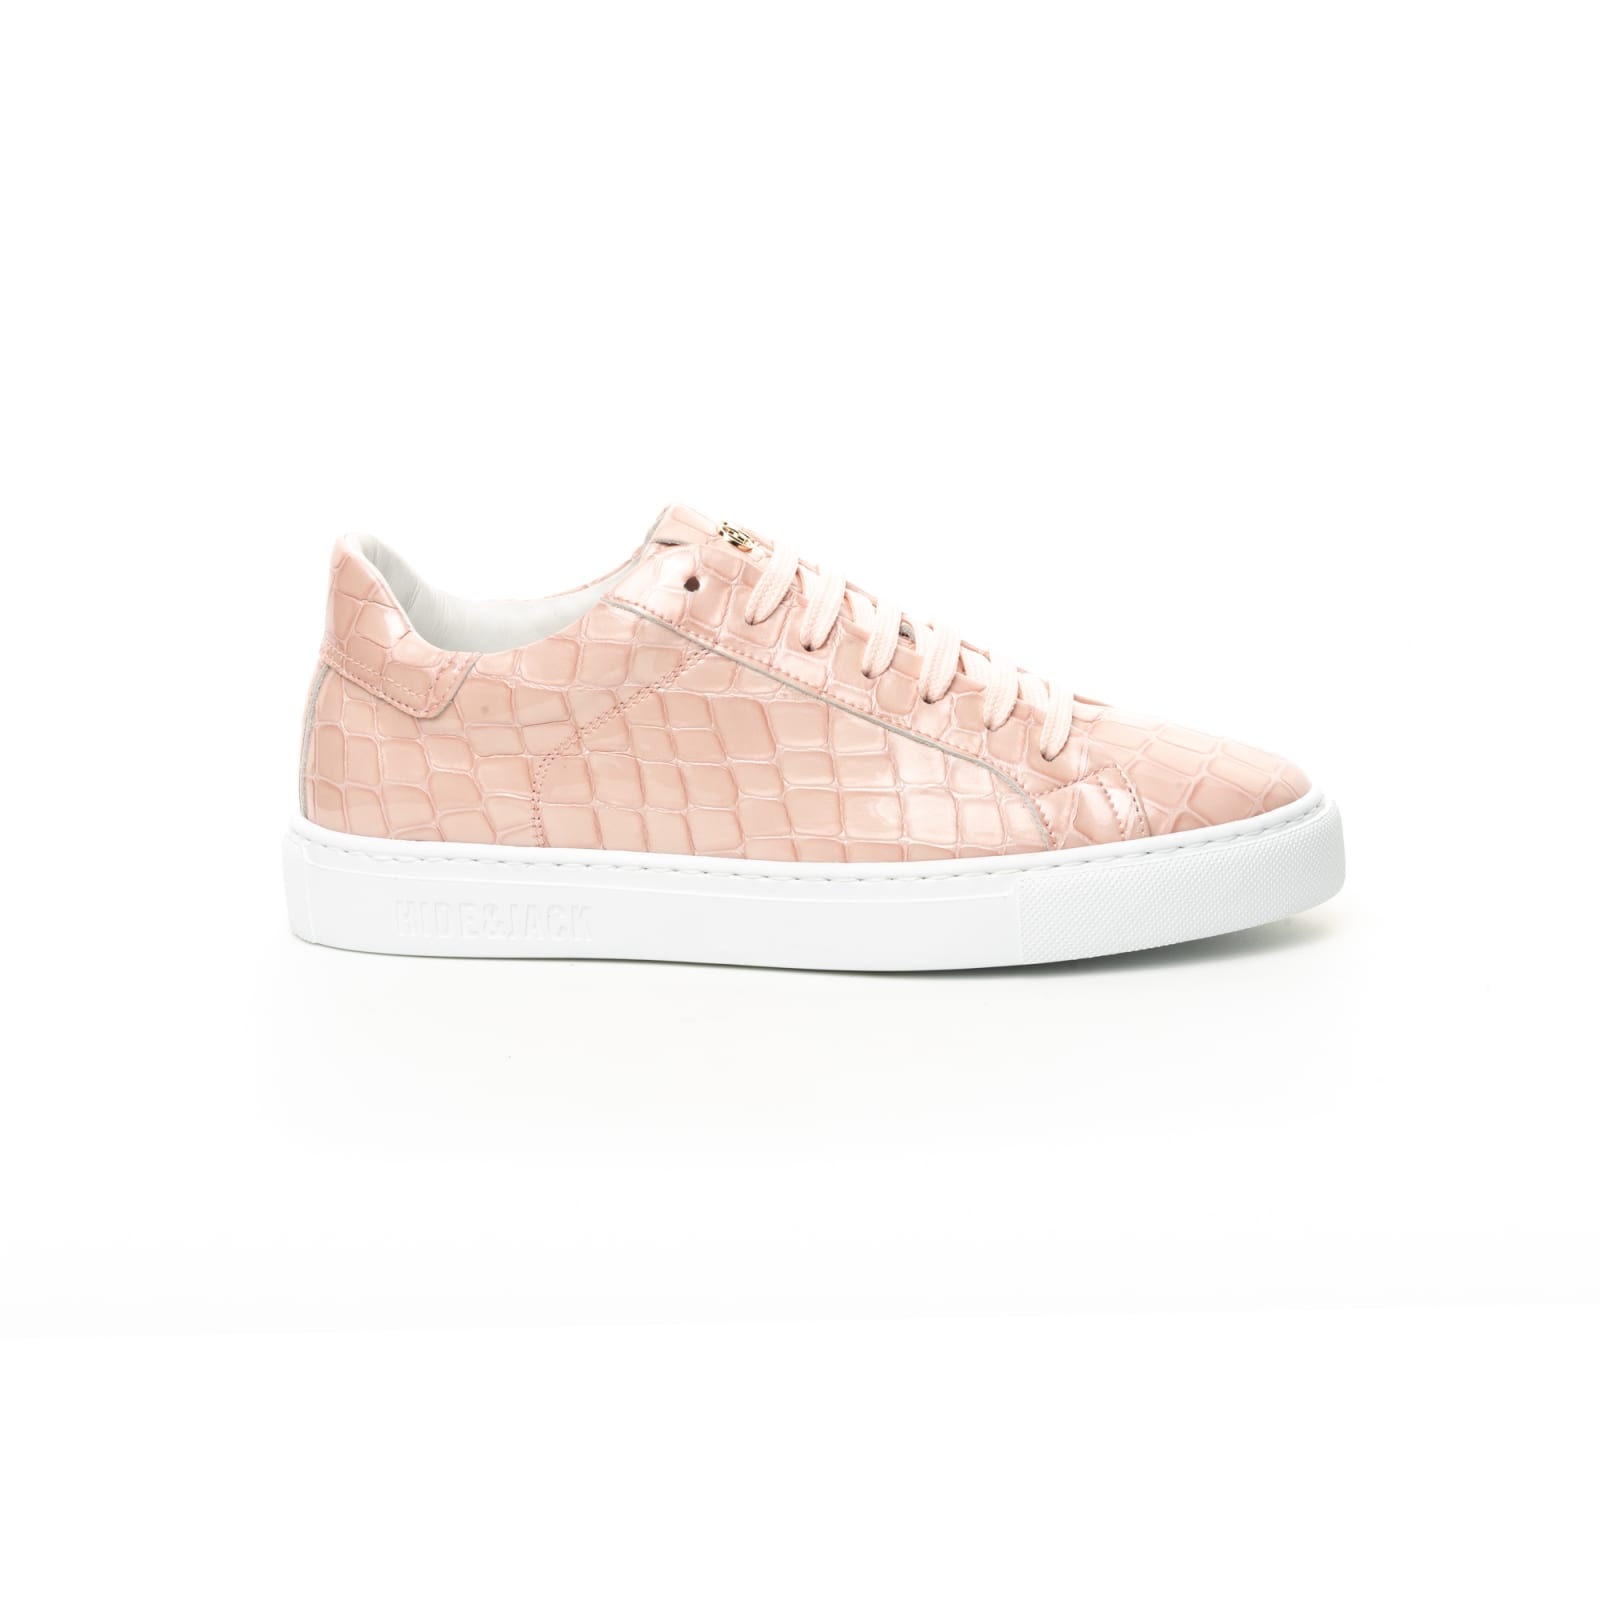 Hide & Jack Low Top Sneaker - Essence Glamour Pink White